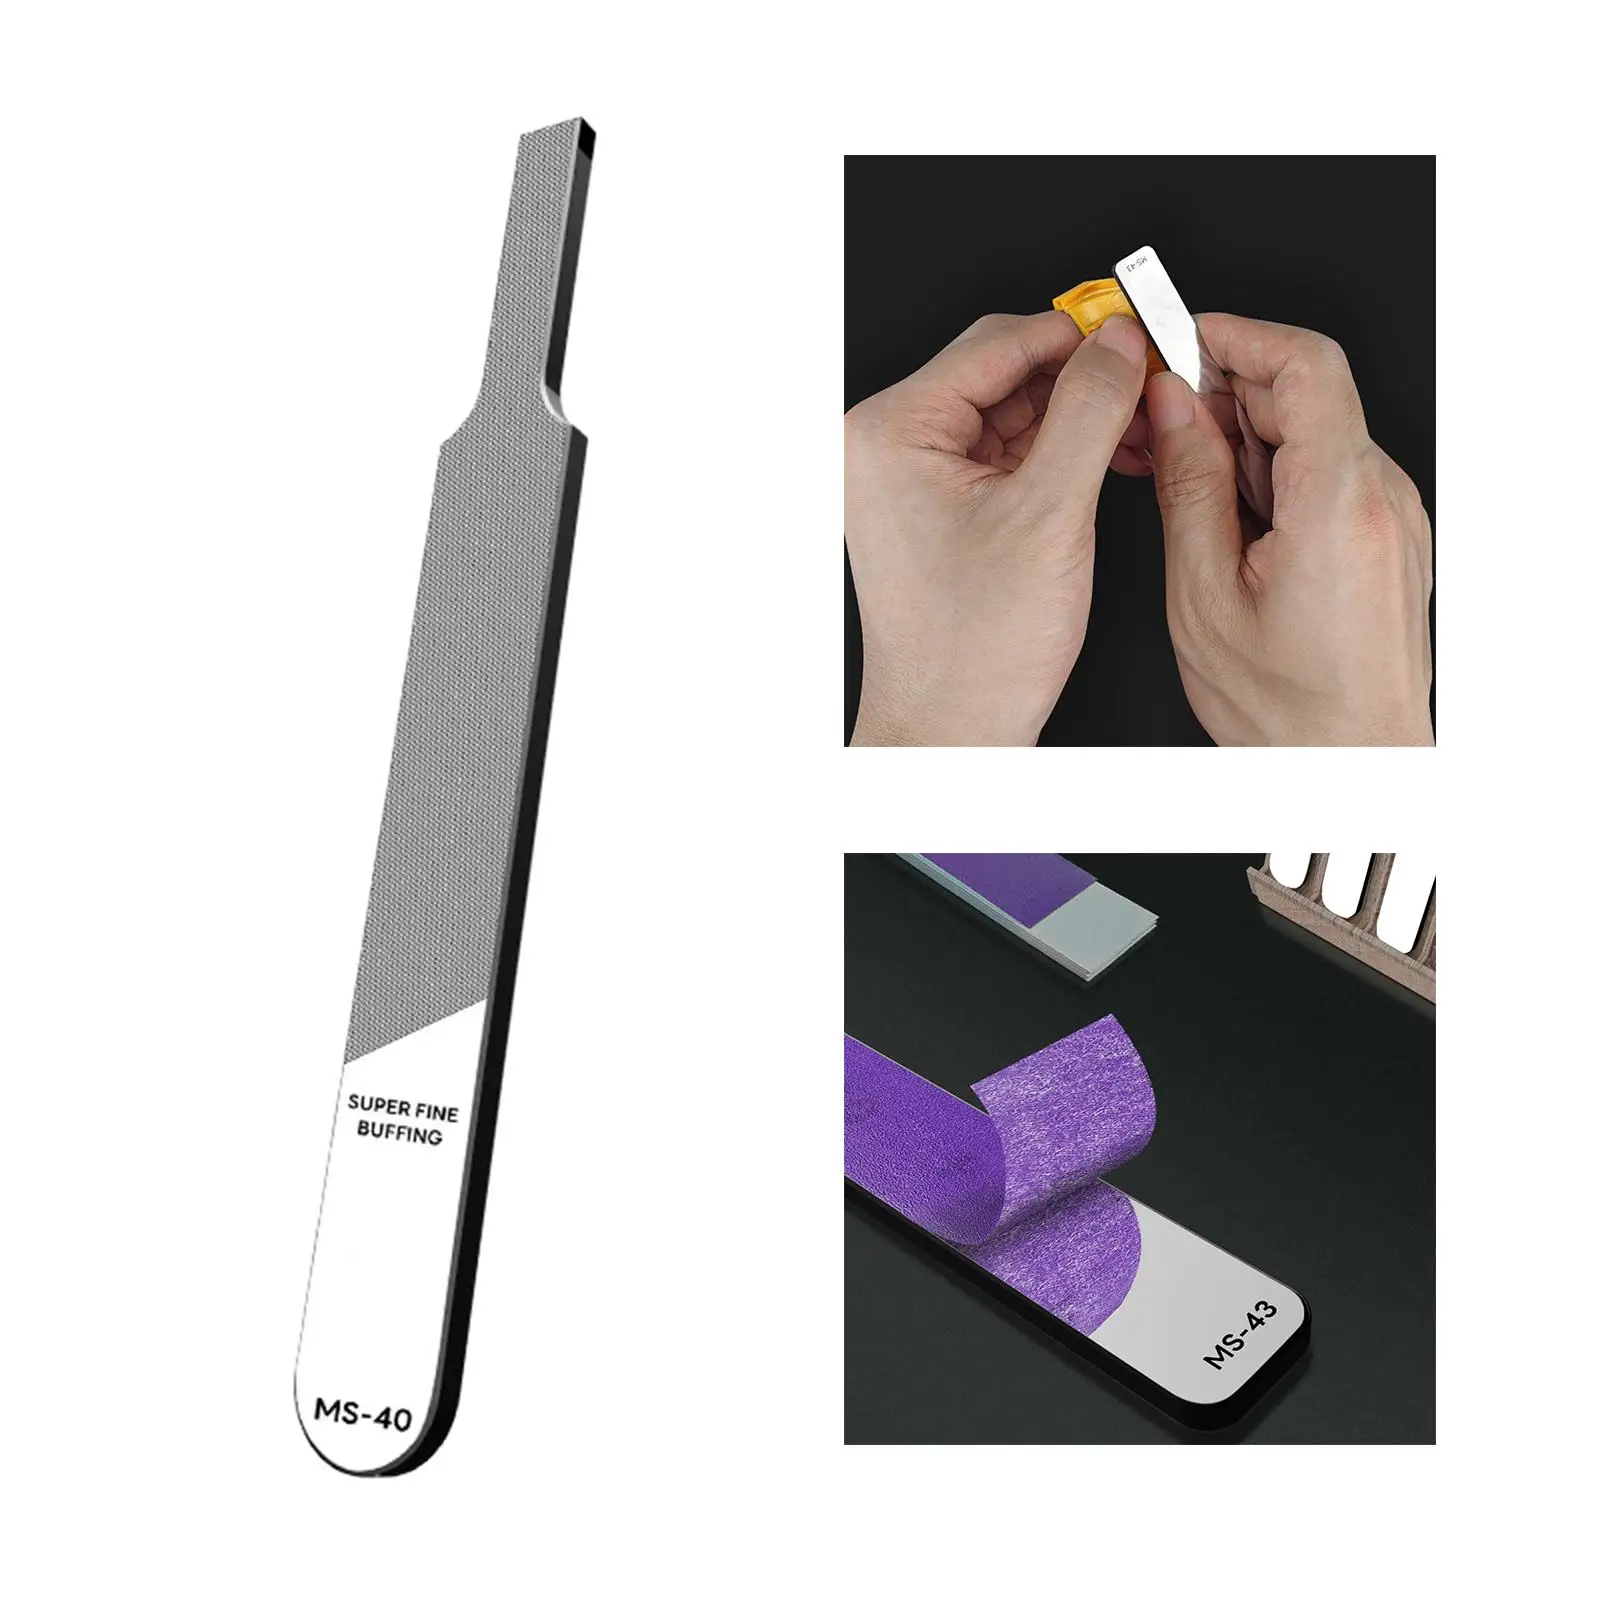 Mirror Polished Glass File for Models Engraving Precision Hobby Grinding Tool for Plane Car Toy Miniature Figure Resin Material